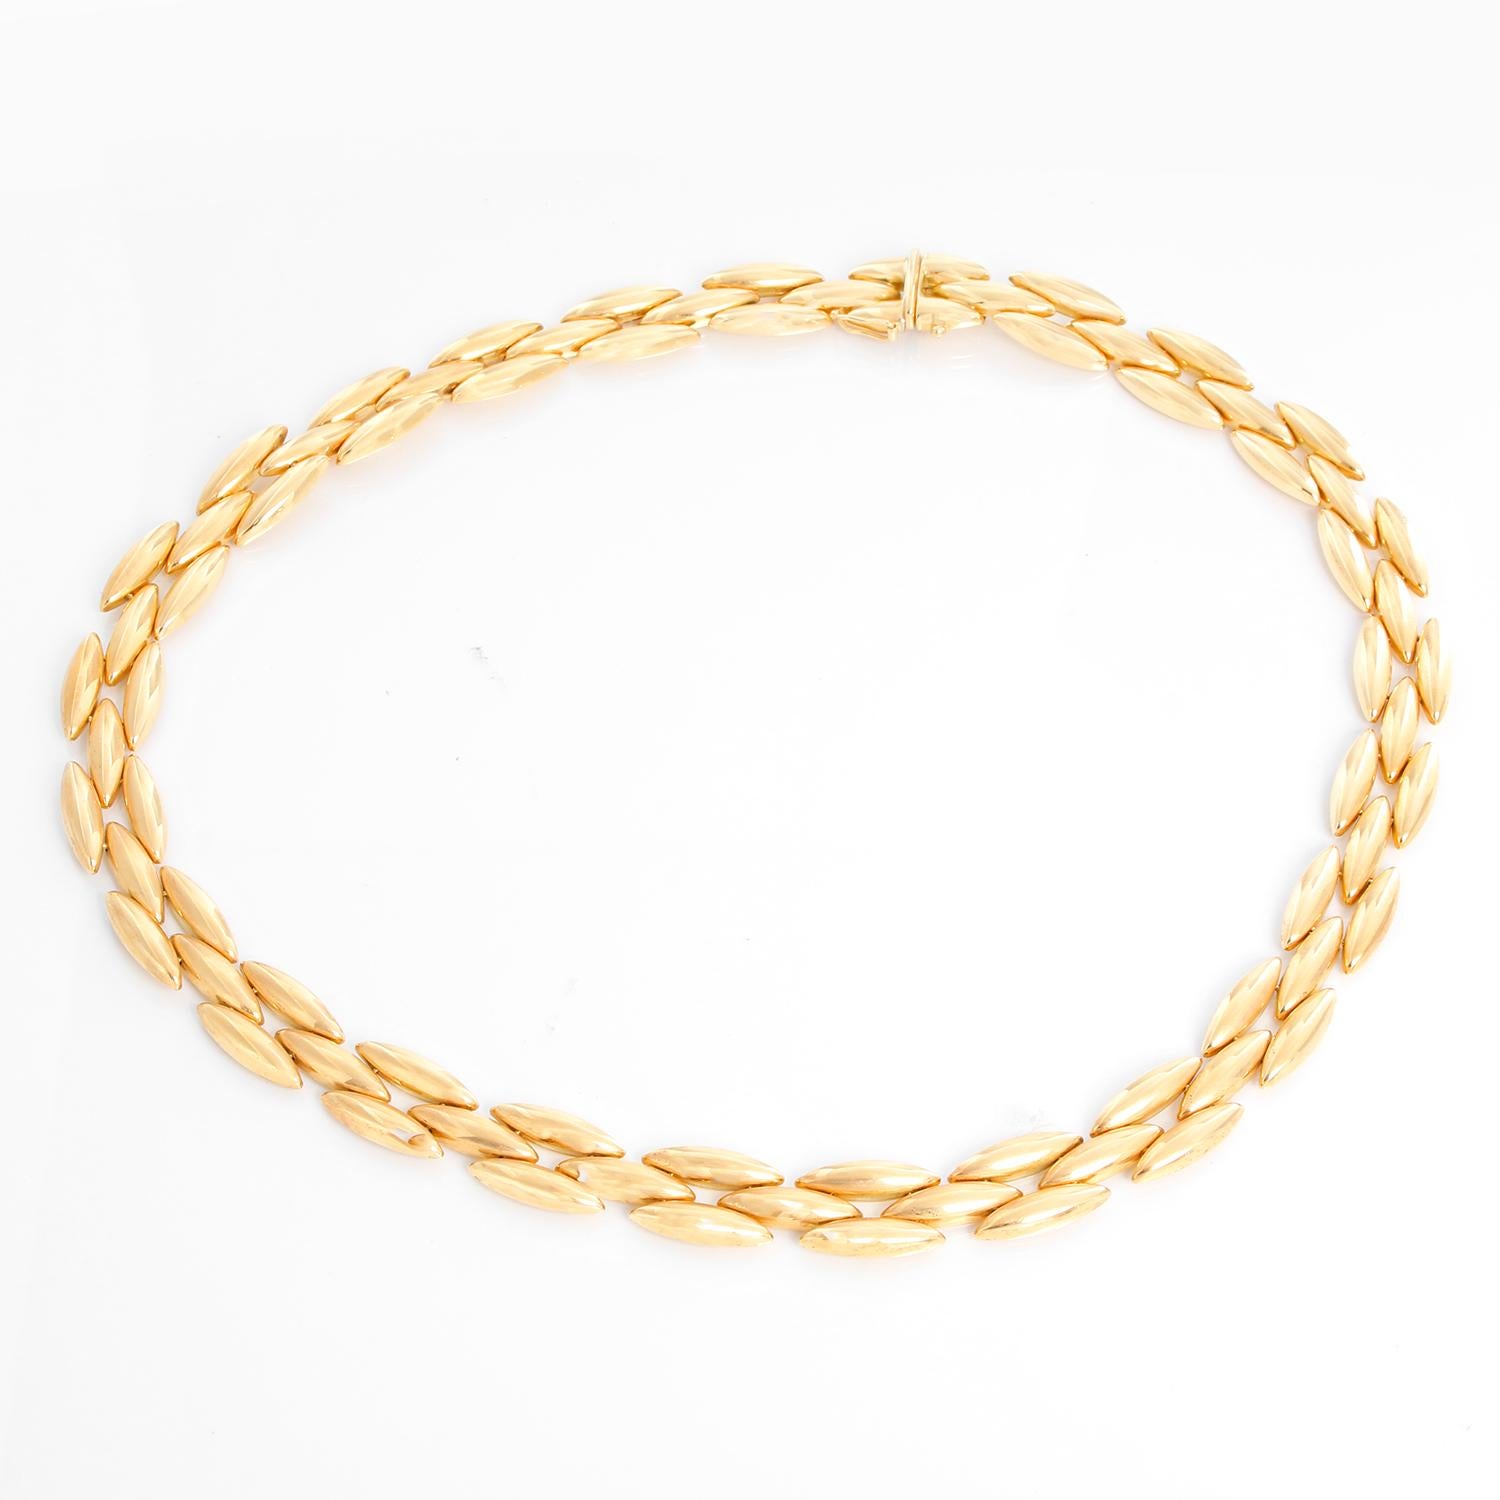 3 row gold necklace